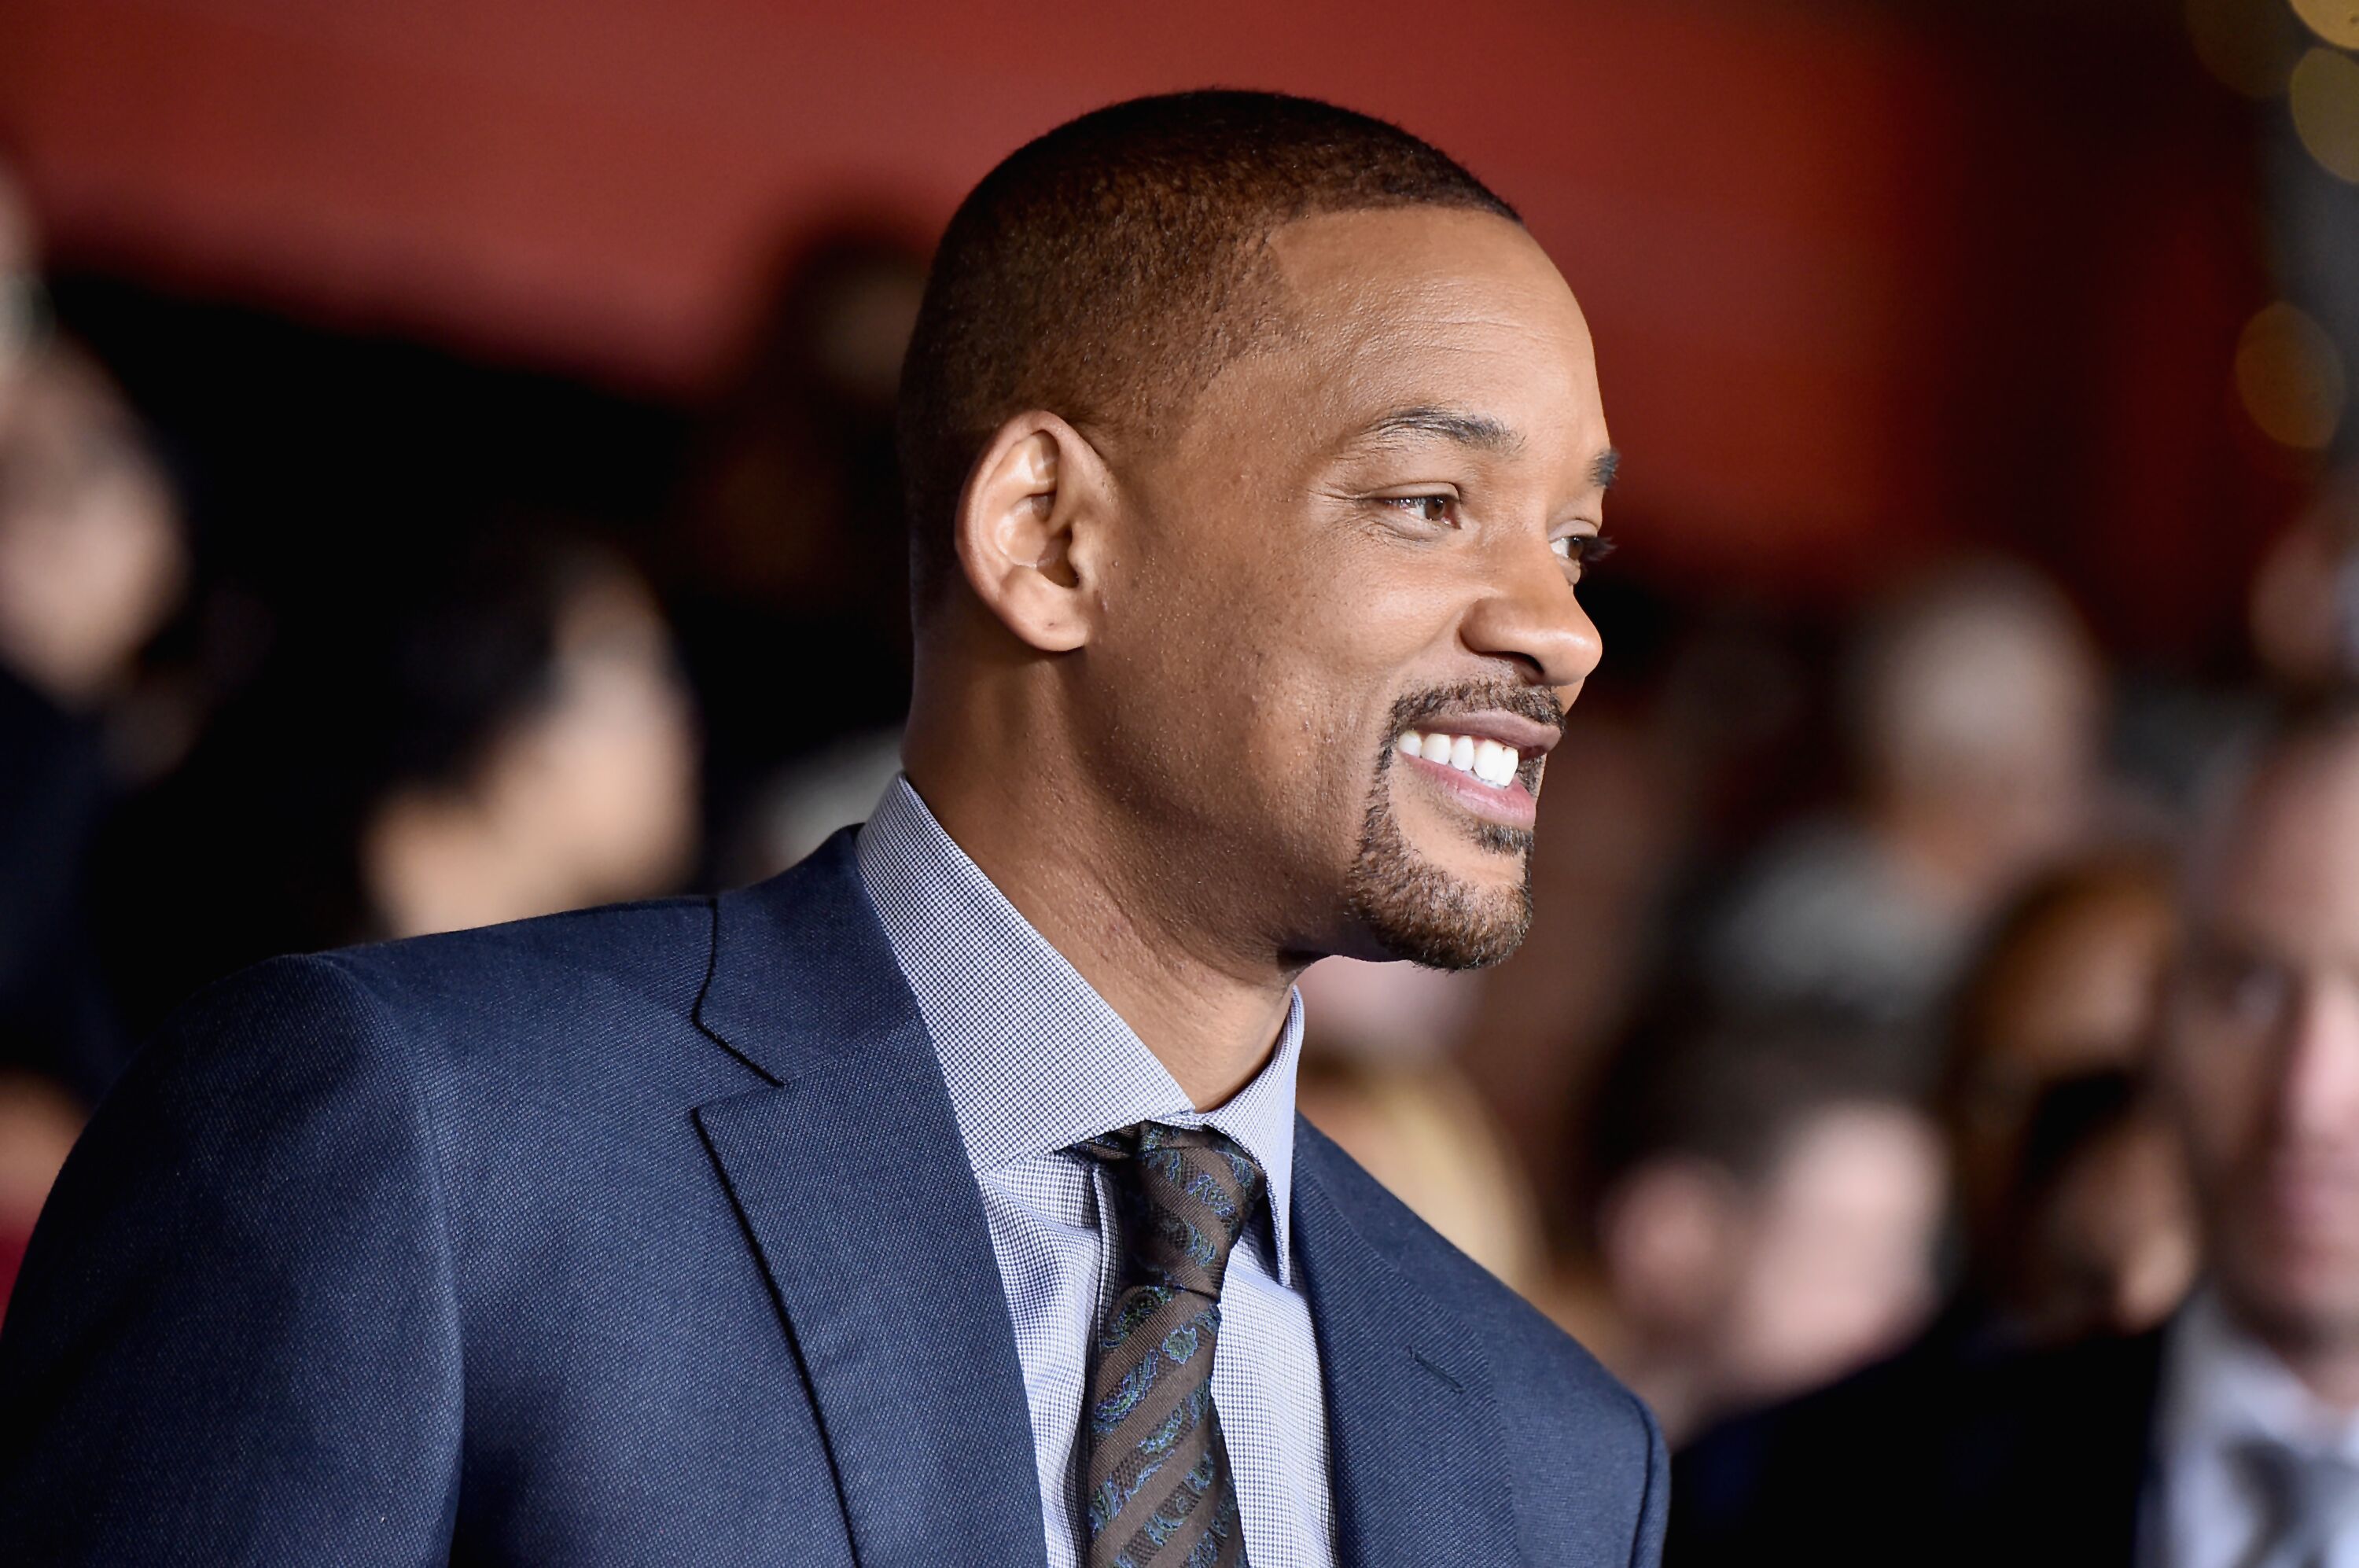 Will Smith attends the Premiere Of Netflix's "Bright" at Regency Village Theatre on December 13, 2017 | Photo: Getty Images